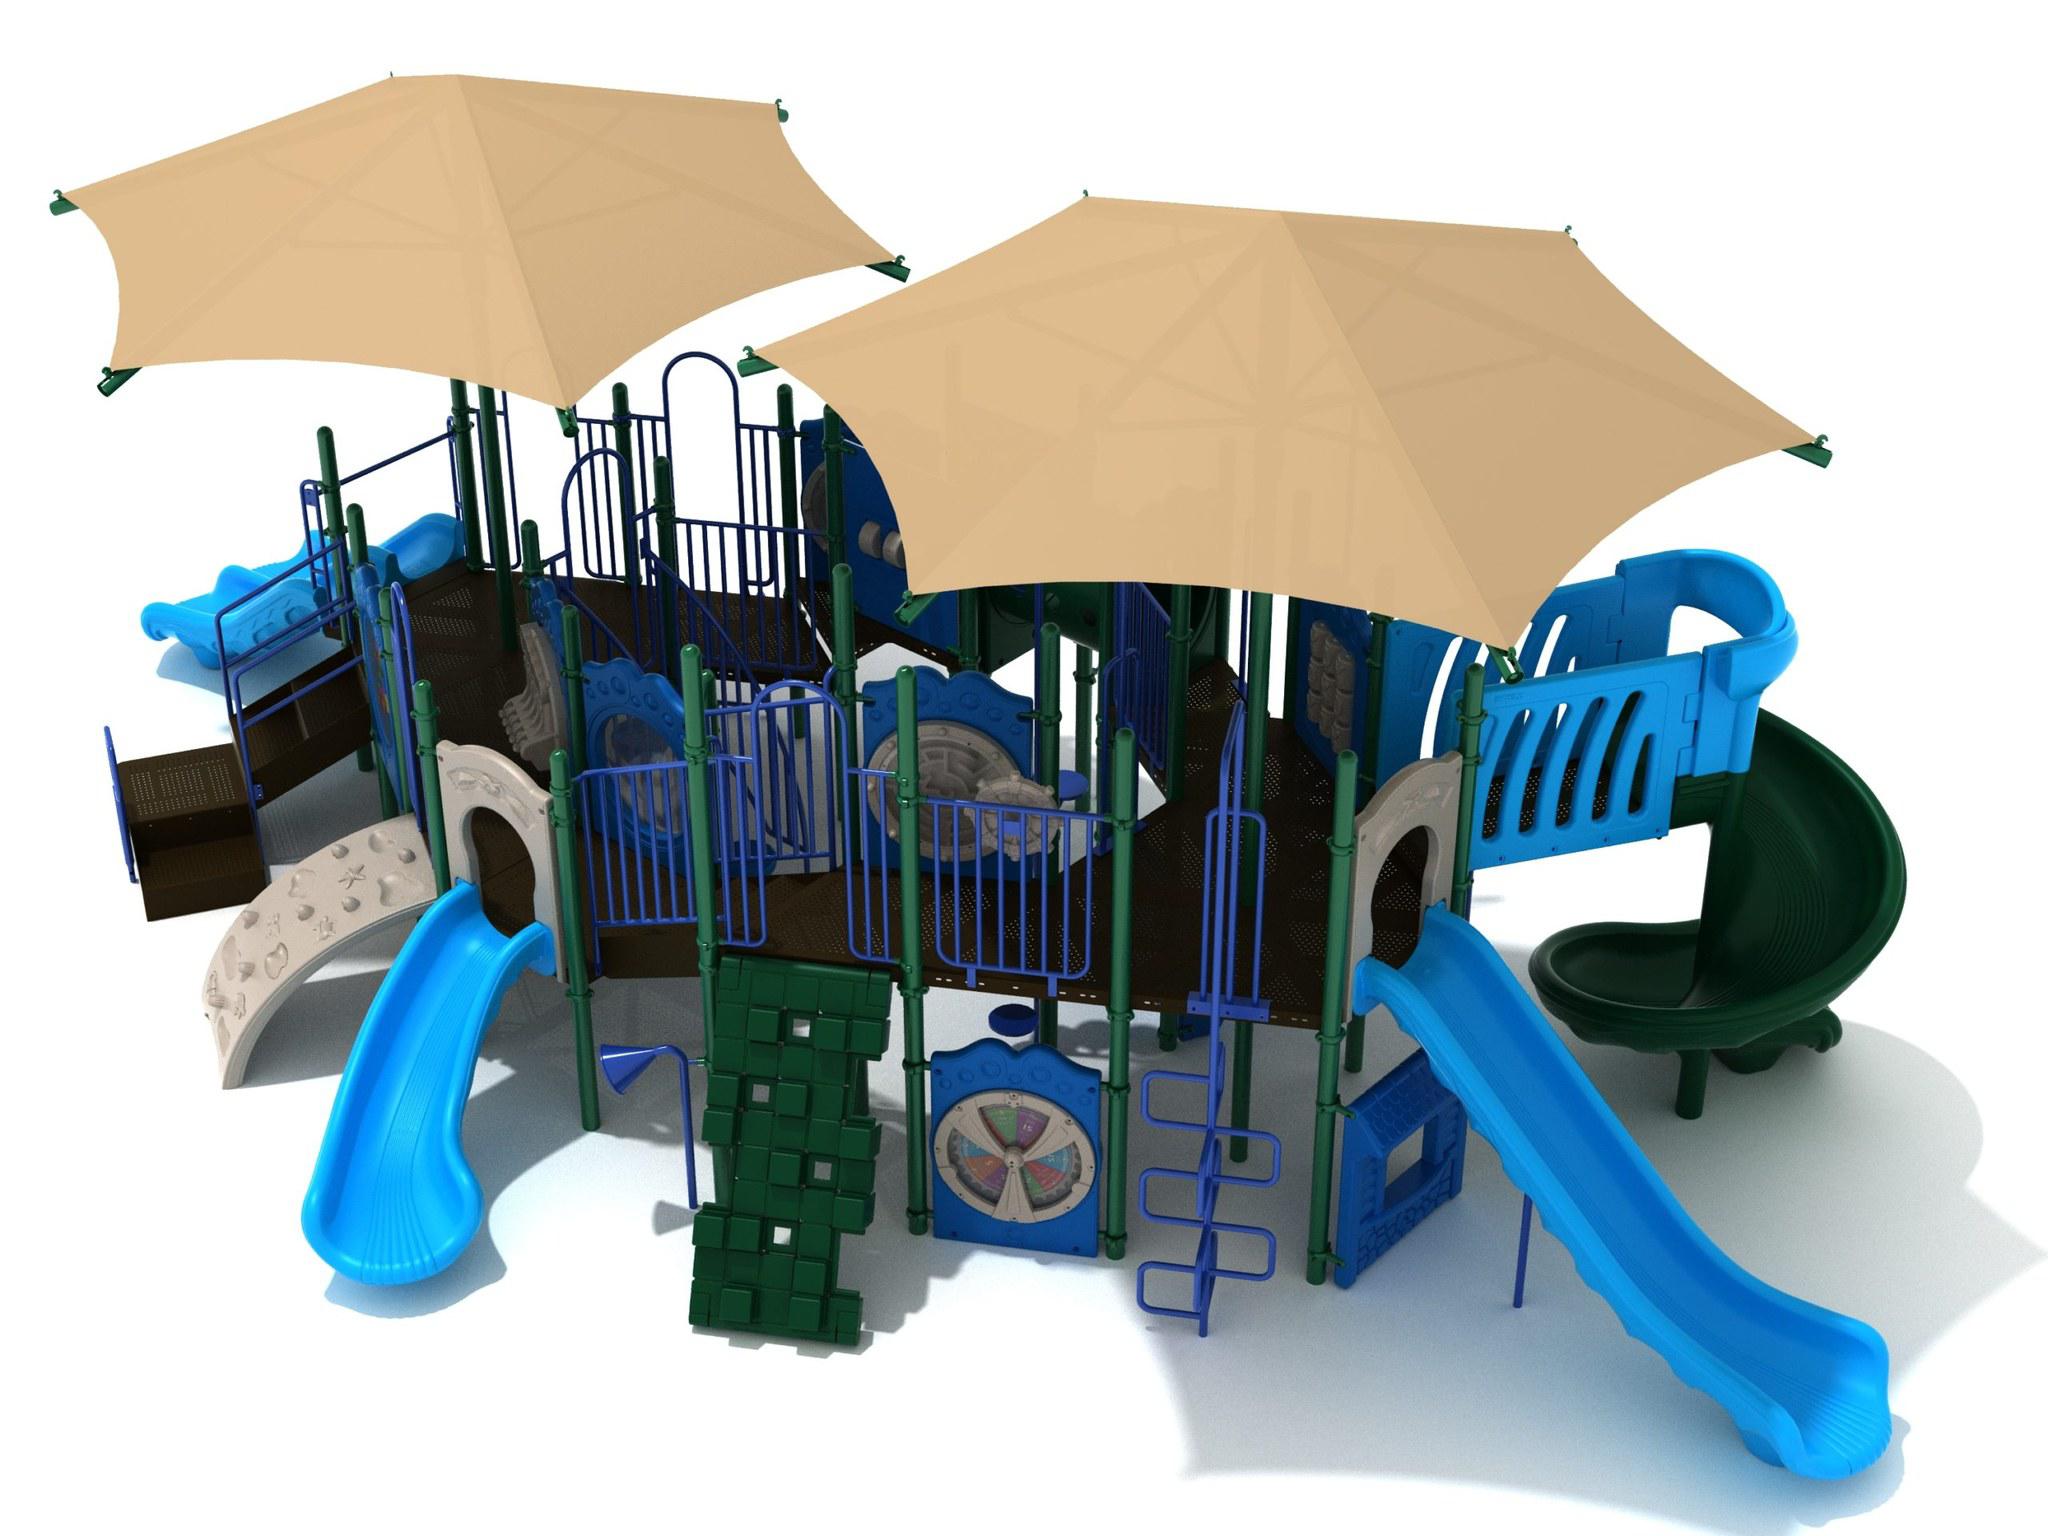 Once they hear all about the mighty collection of amusements, kids will want to pack their bags and leave tonight for the commercial-grade Paradise playscape. 
This mighty composite structure is built around a central octagon pathway whose upper level is reached by way of a short series of steps connected to a ground level Transfer Station.